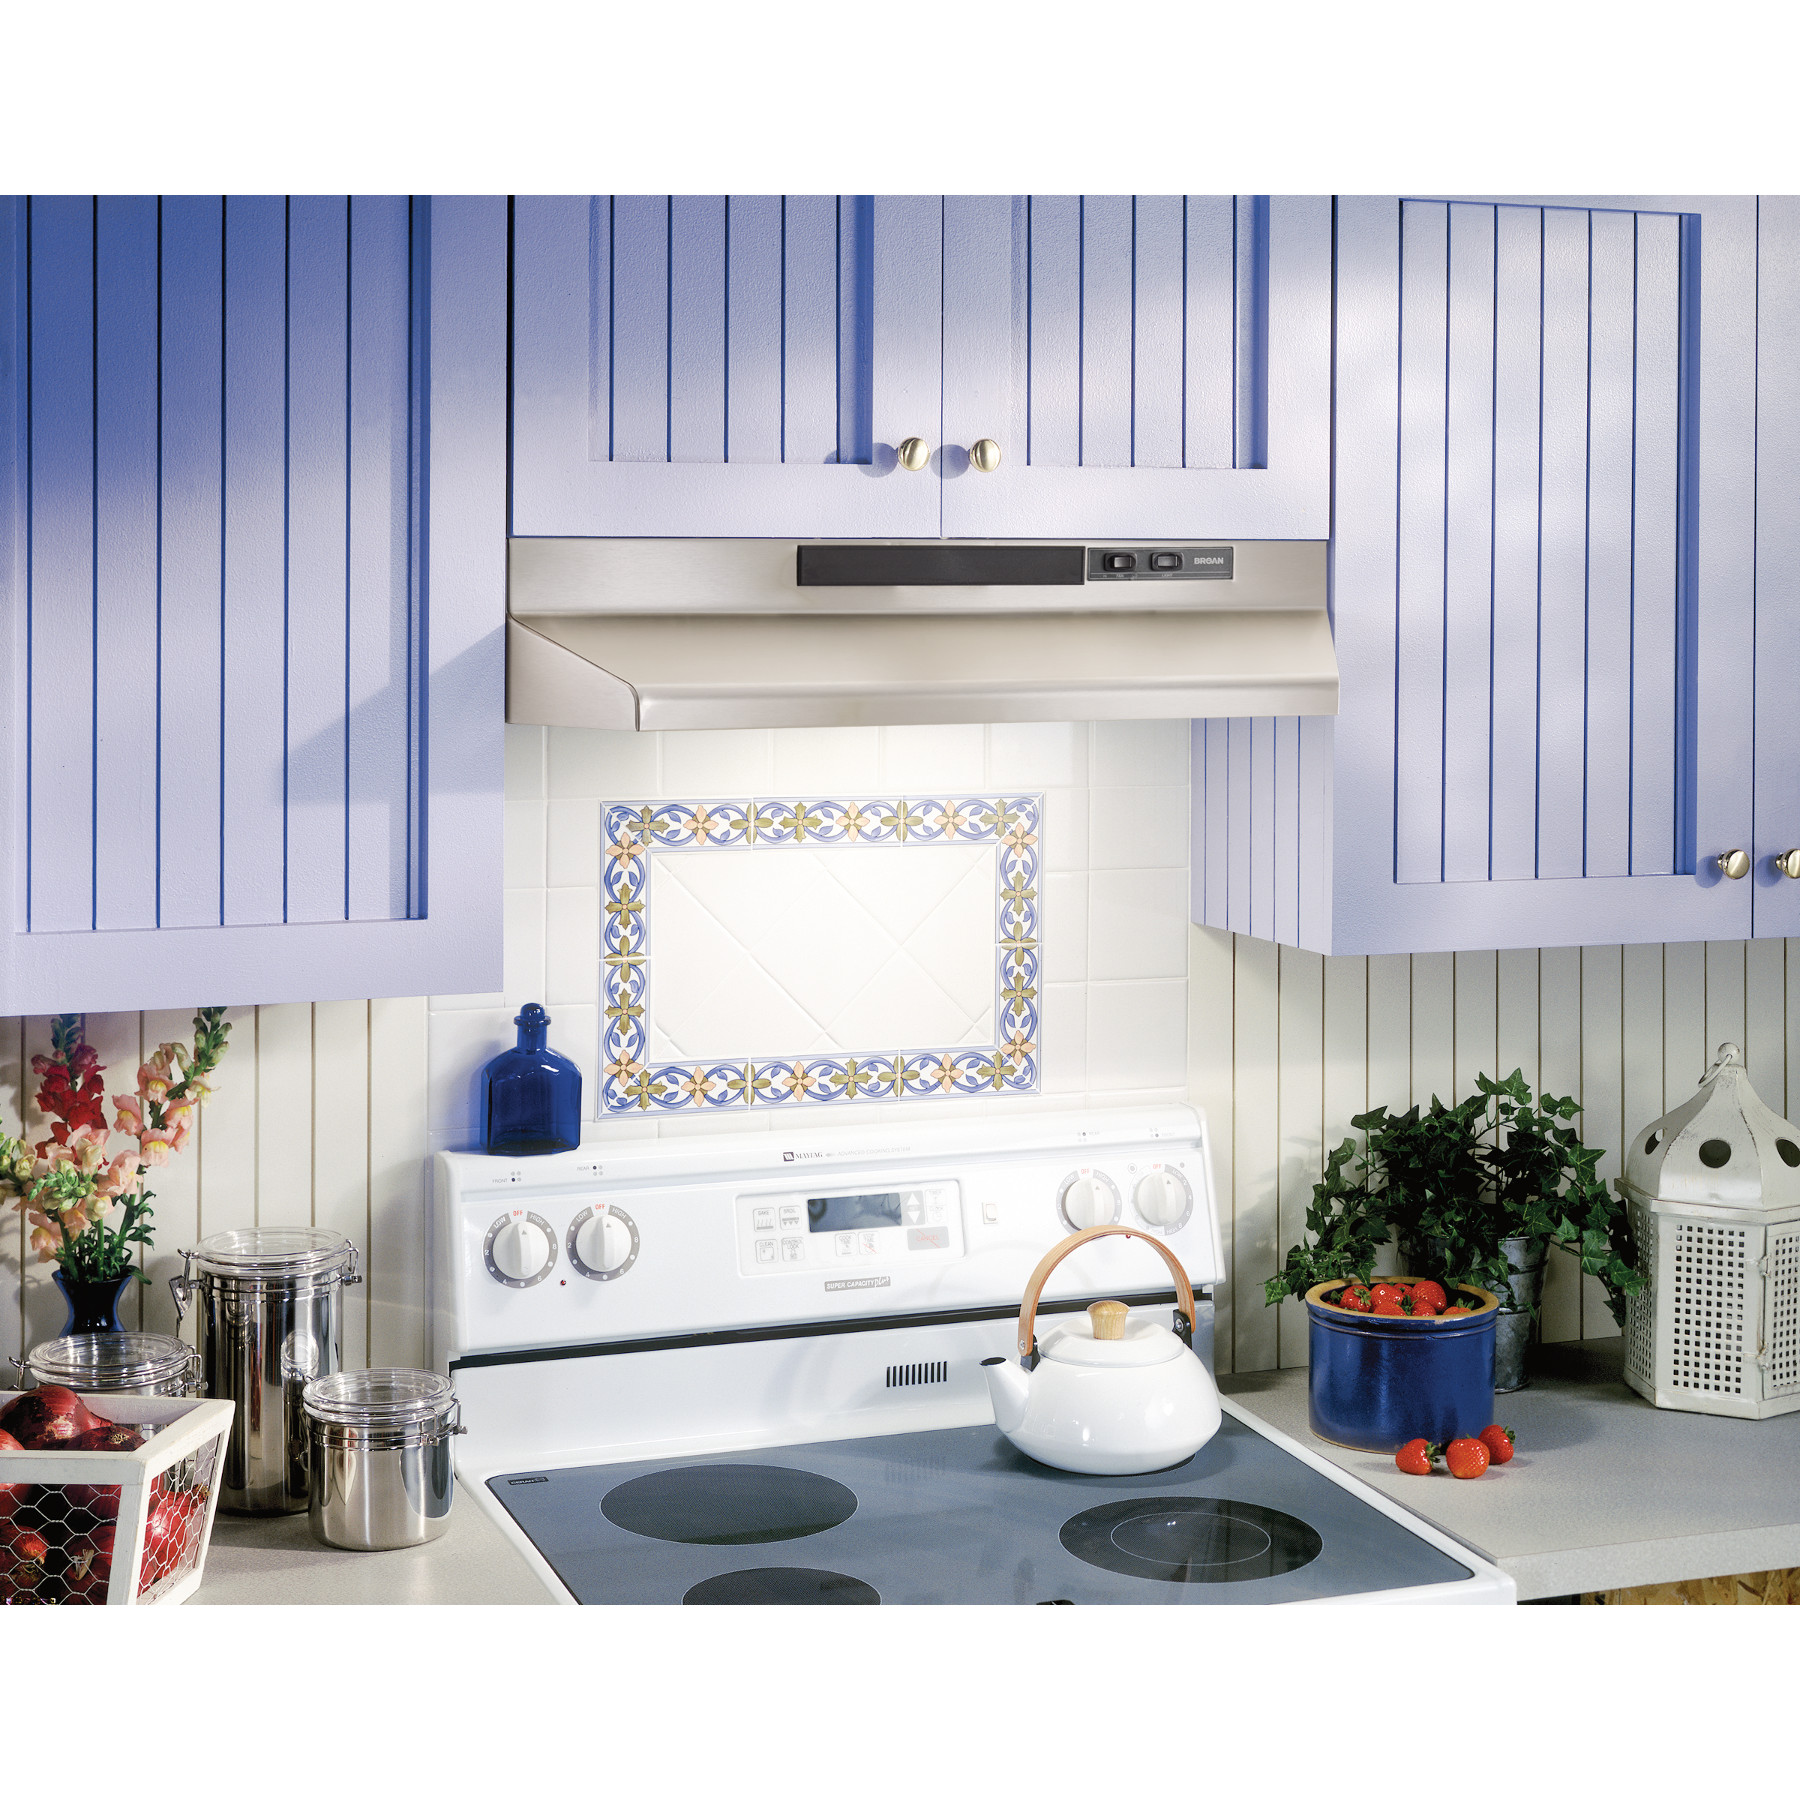 30-Inch Details about   Broan-NuTone F403004 Two-Speed Four-Way Convertible Range Hood Stainle 